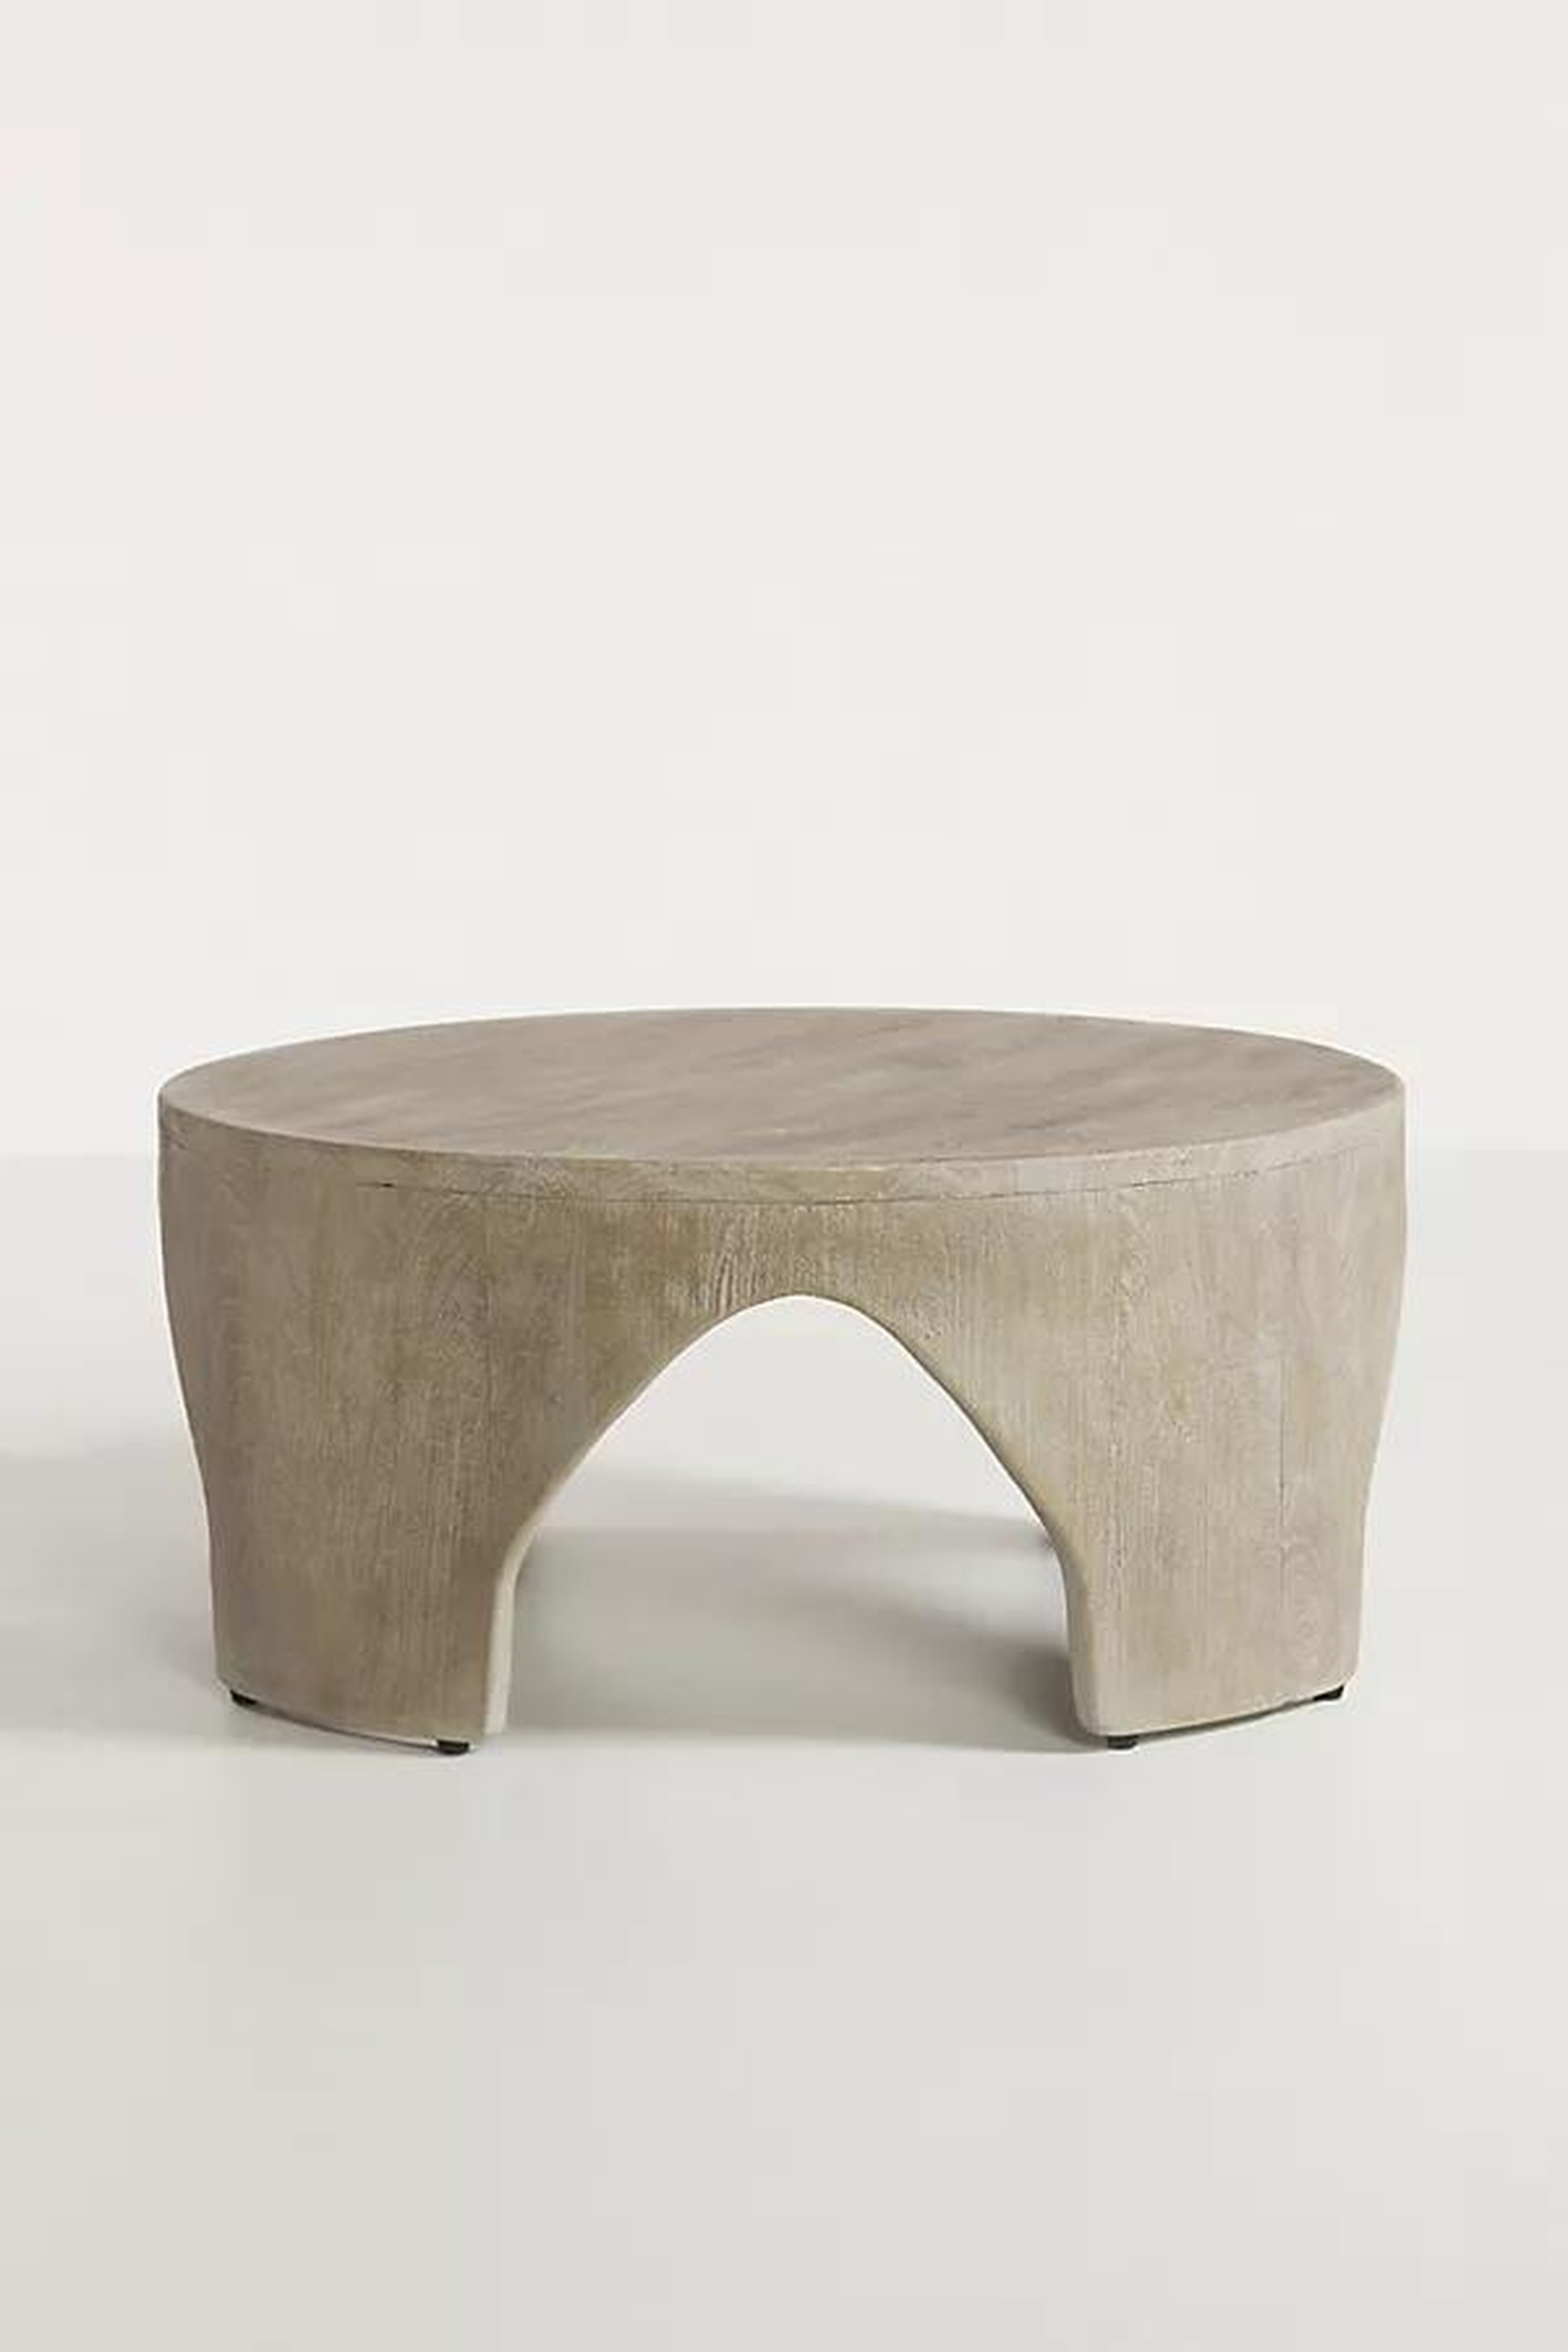 Jonas Coffee Table By Anthropologie in Grey - Anthropologie